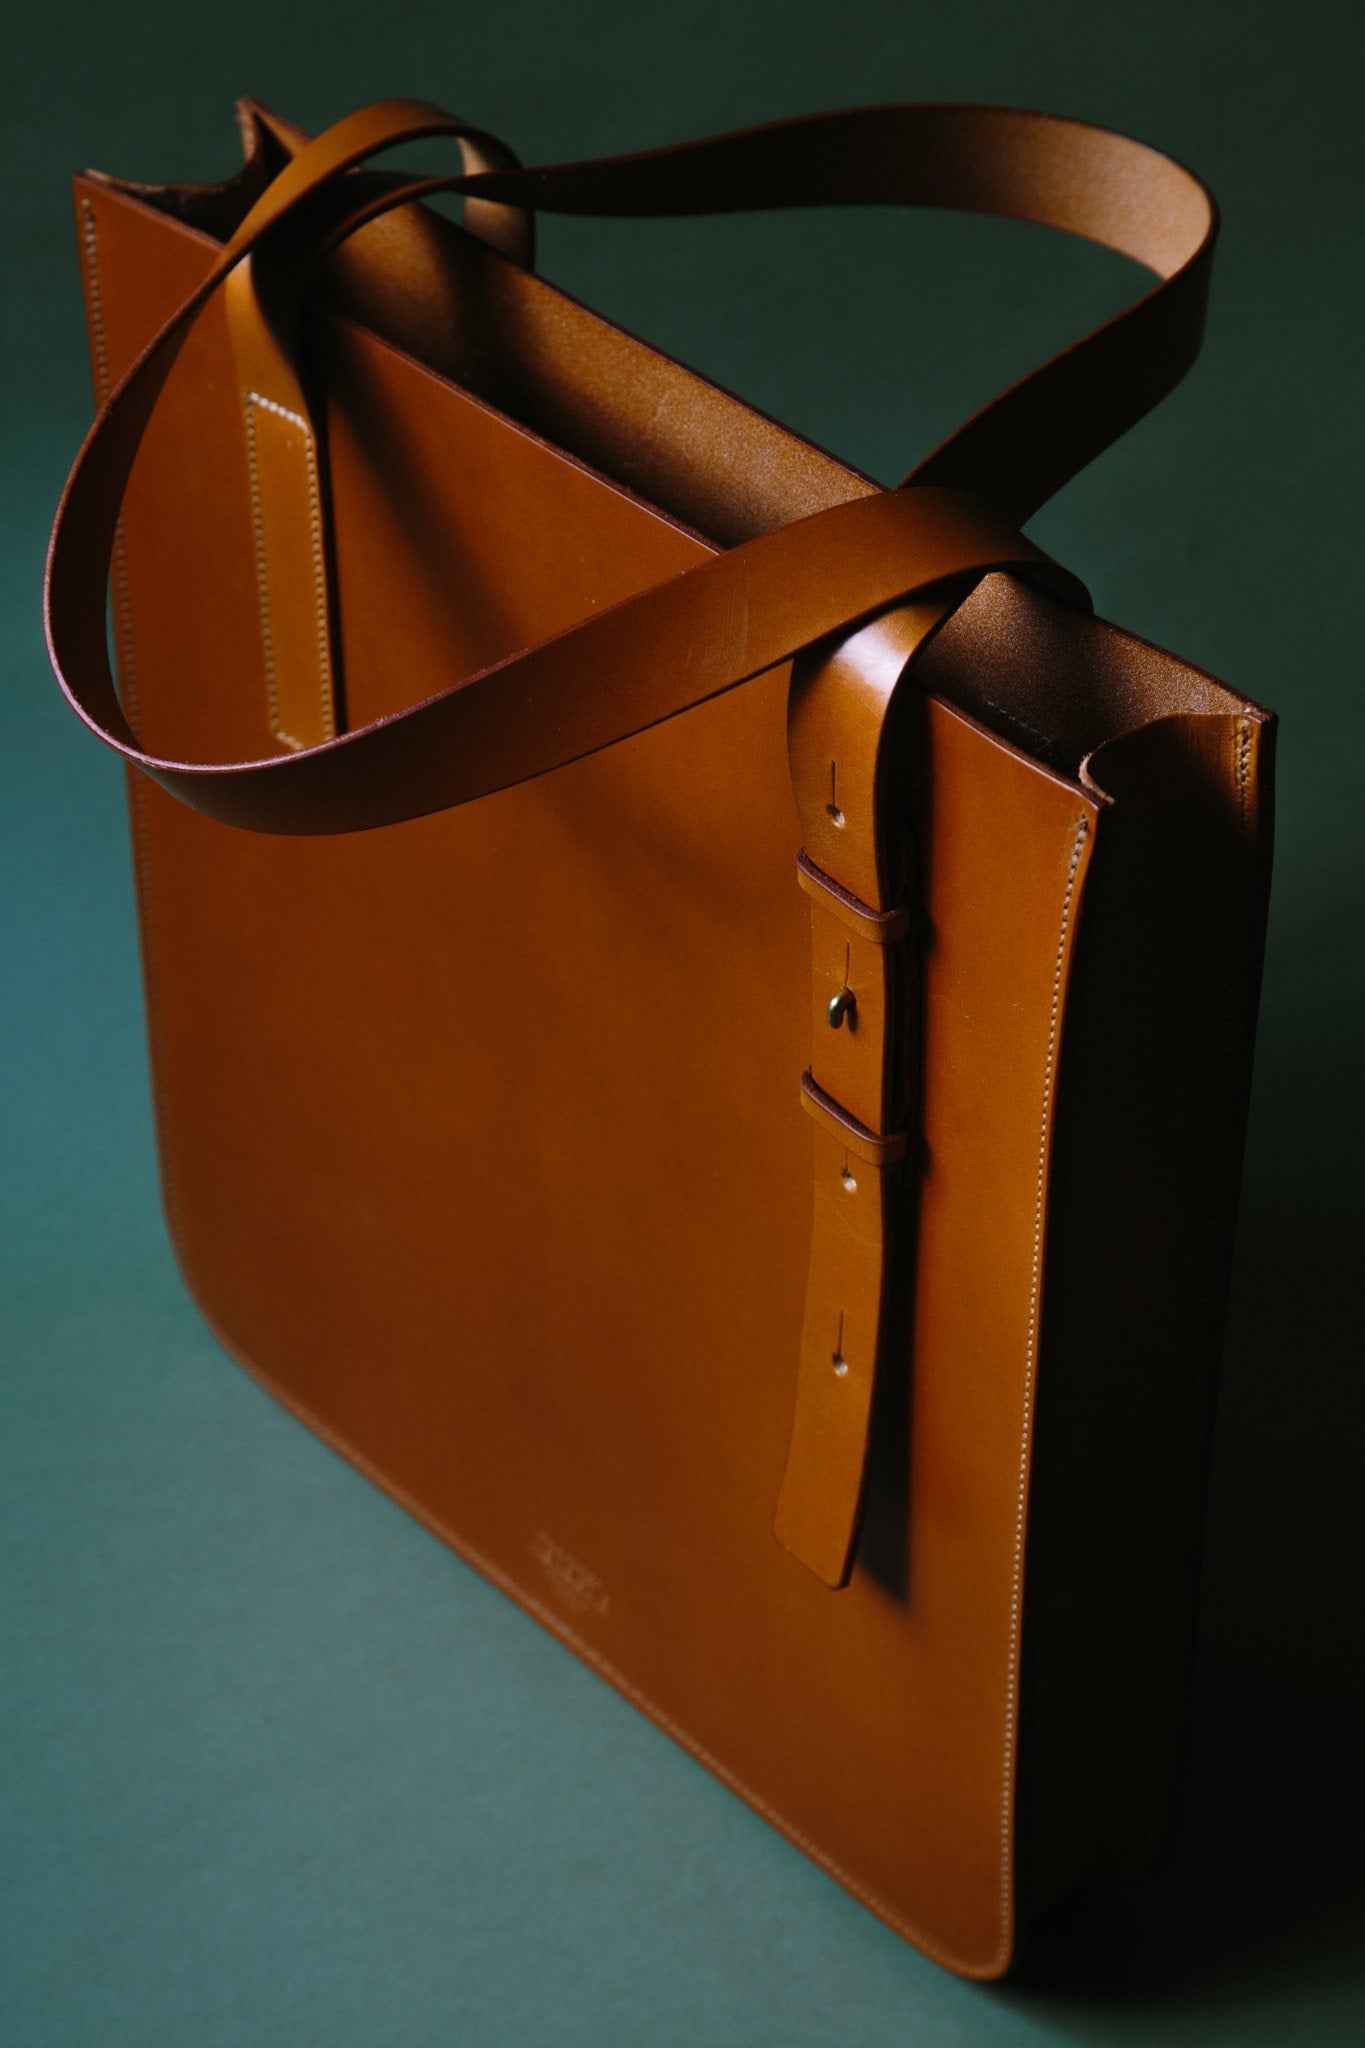 A third angle of the leather Lismore tote bag where the length of the handle can be seen and the inside of the unlined bag.